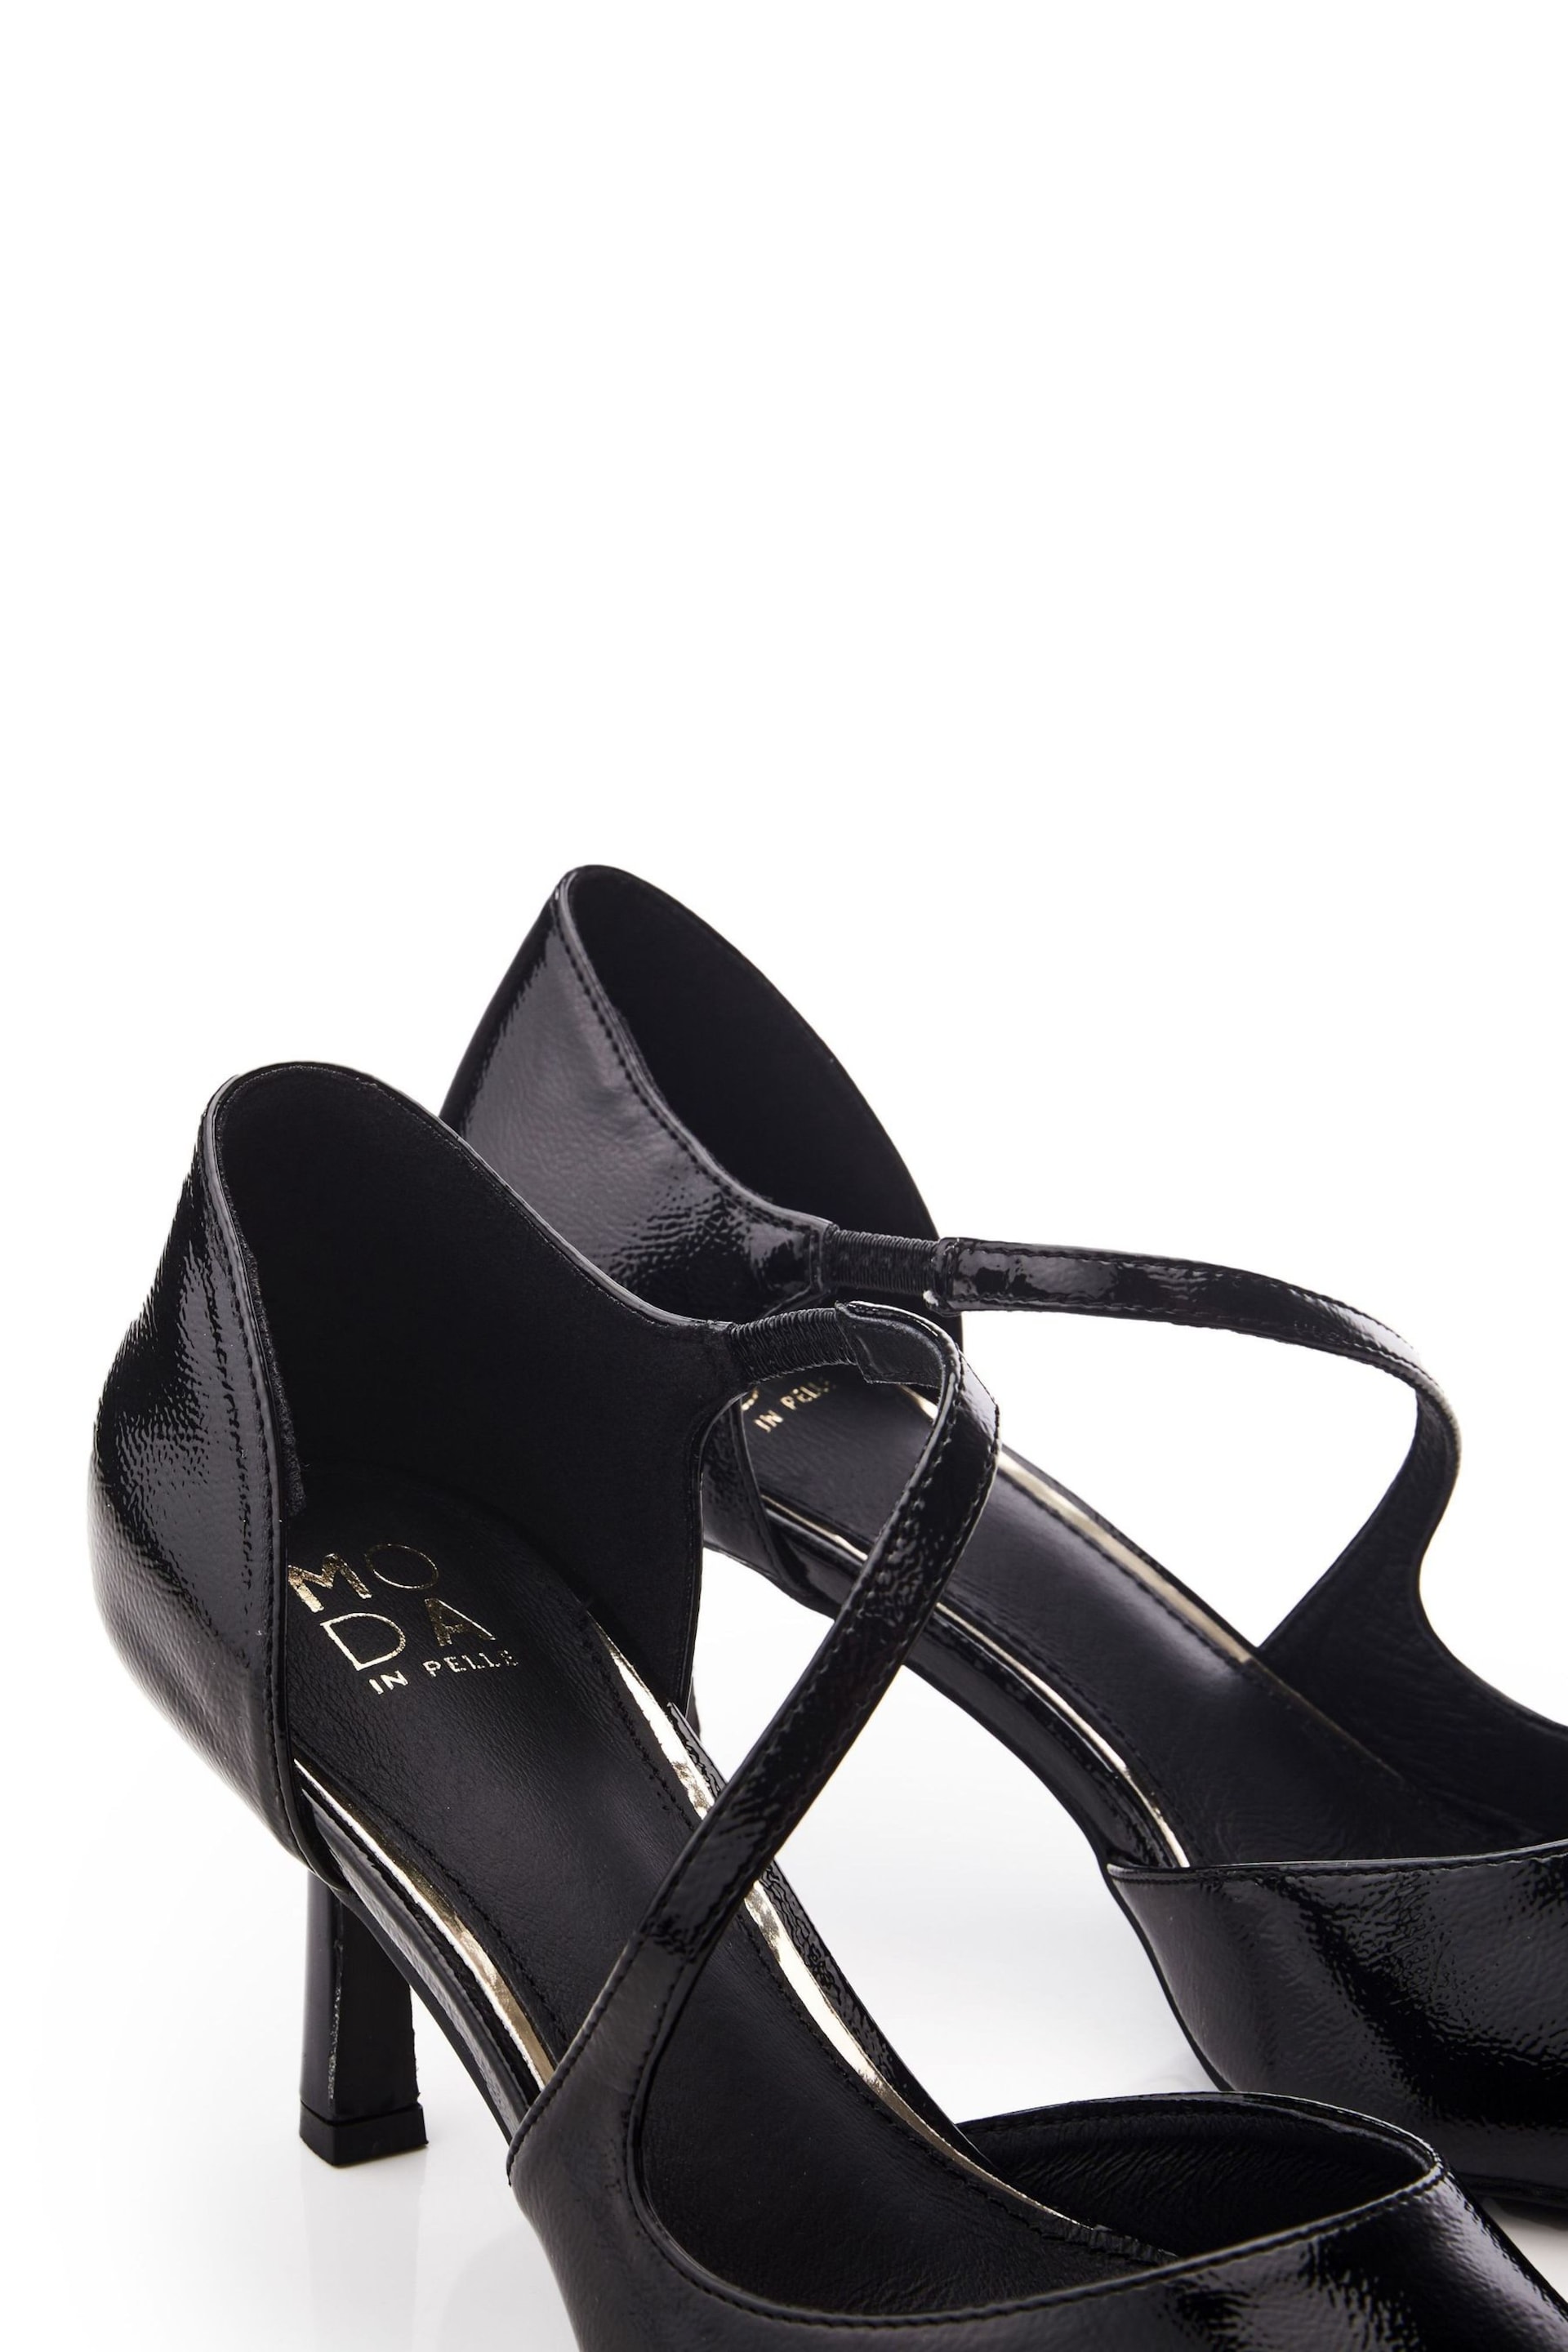 Moda in Pelle Daleiza Heeled Pointed Crossover Court Black Shoes - Image 4 of 4